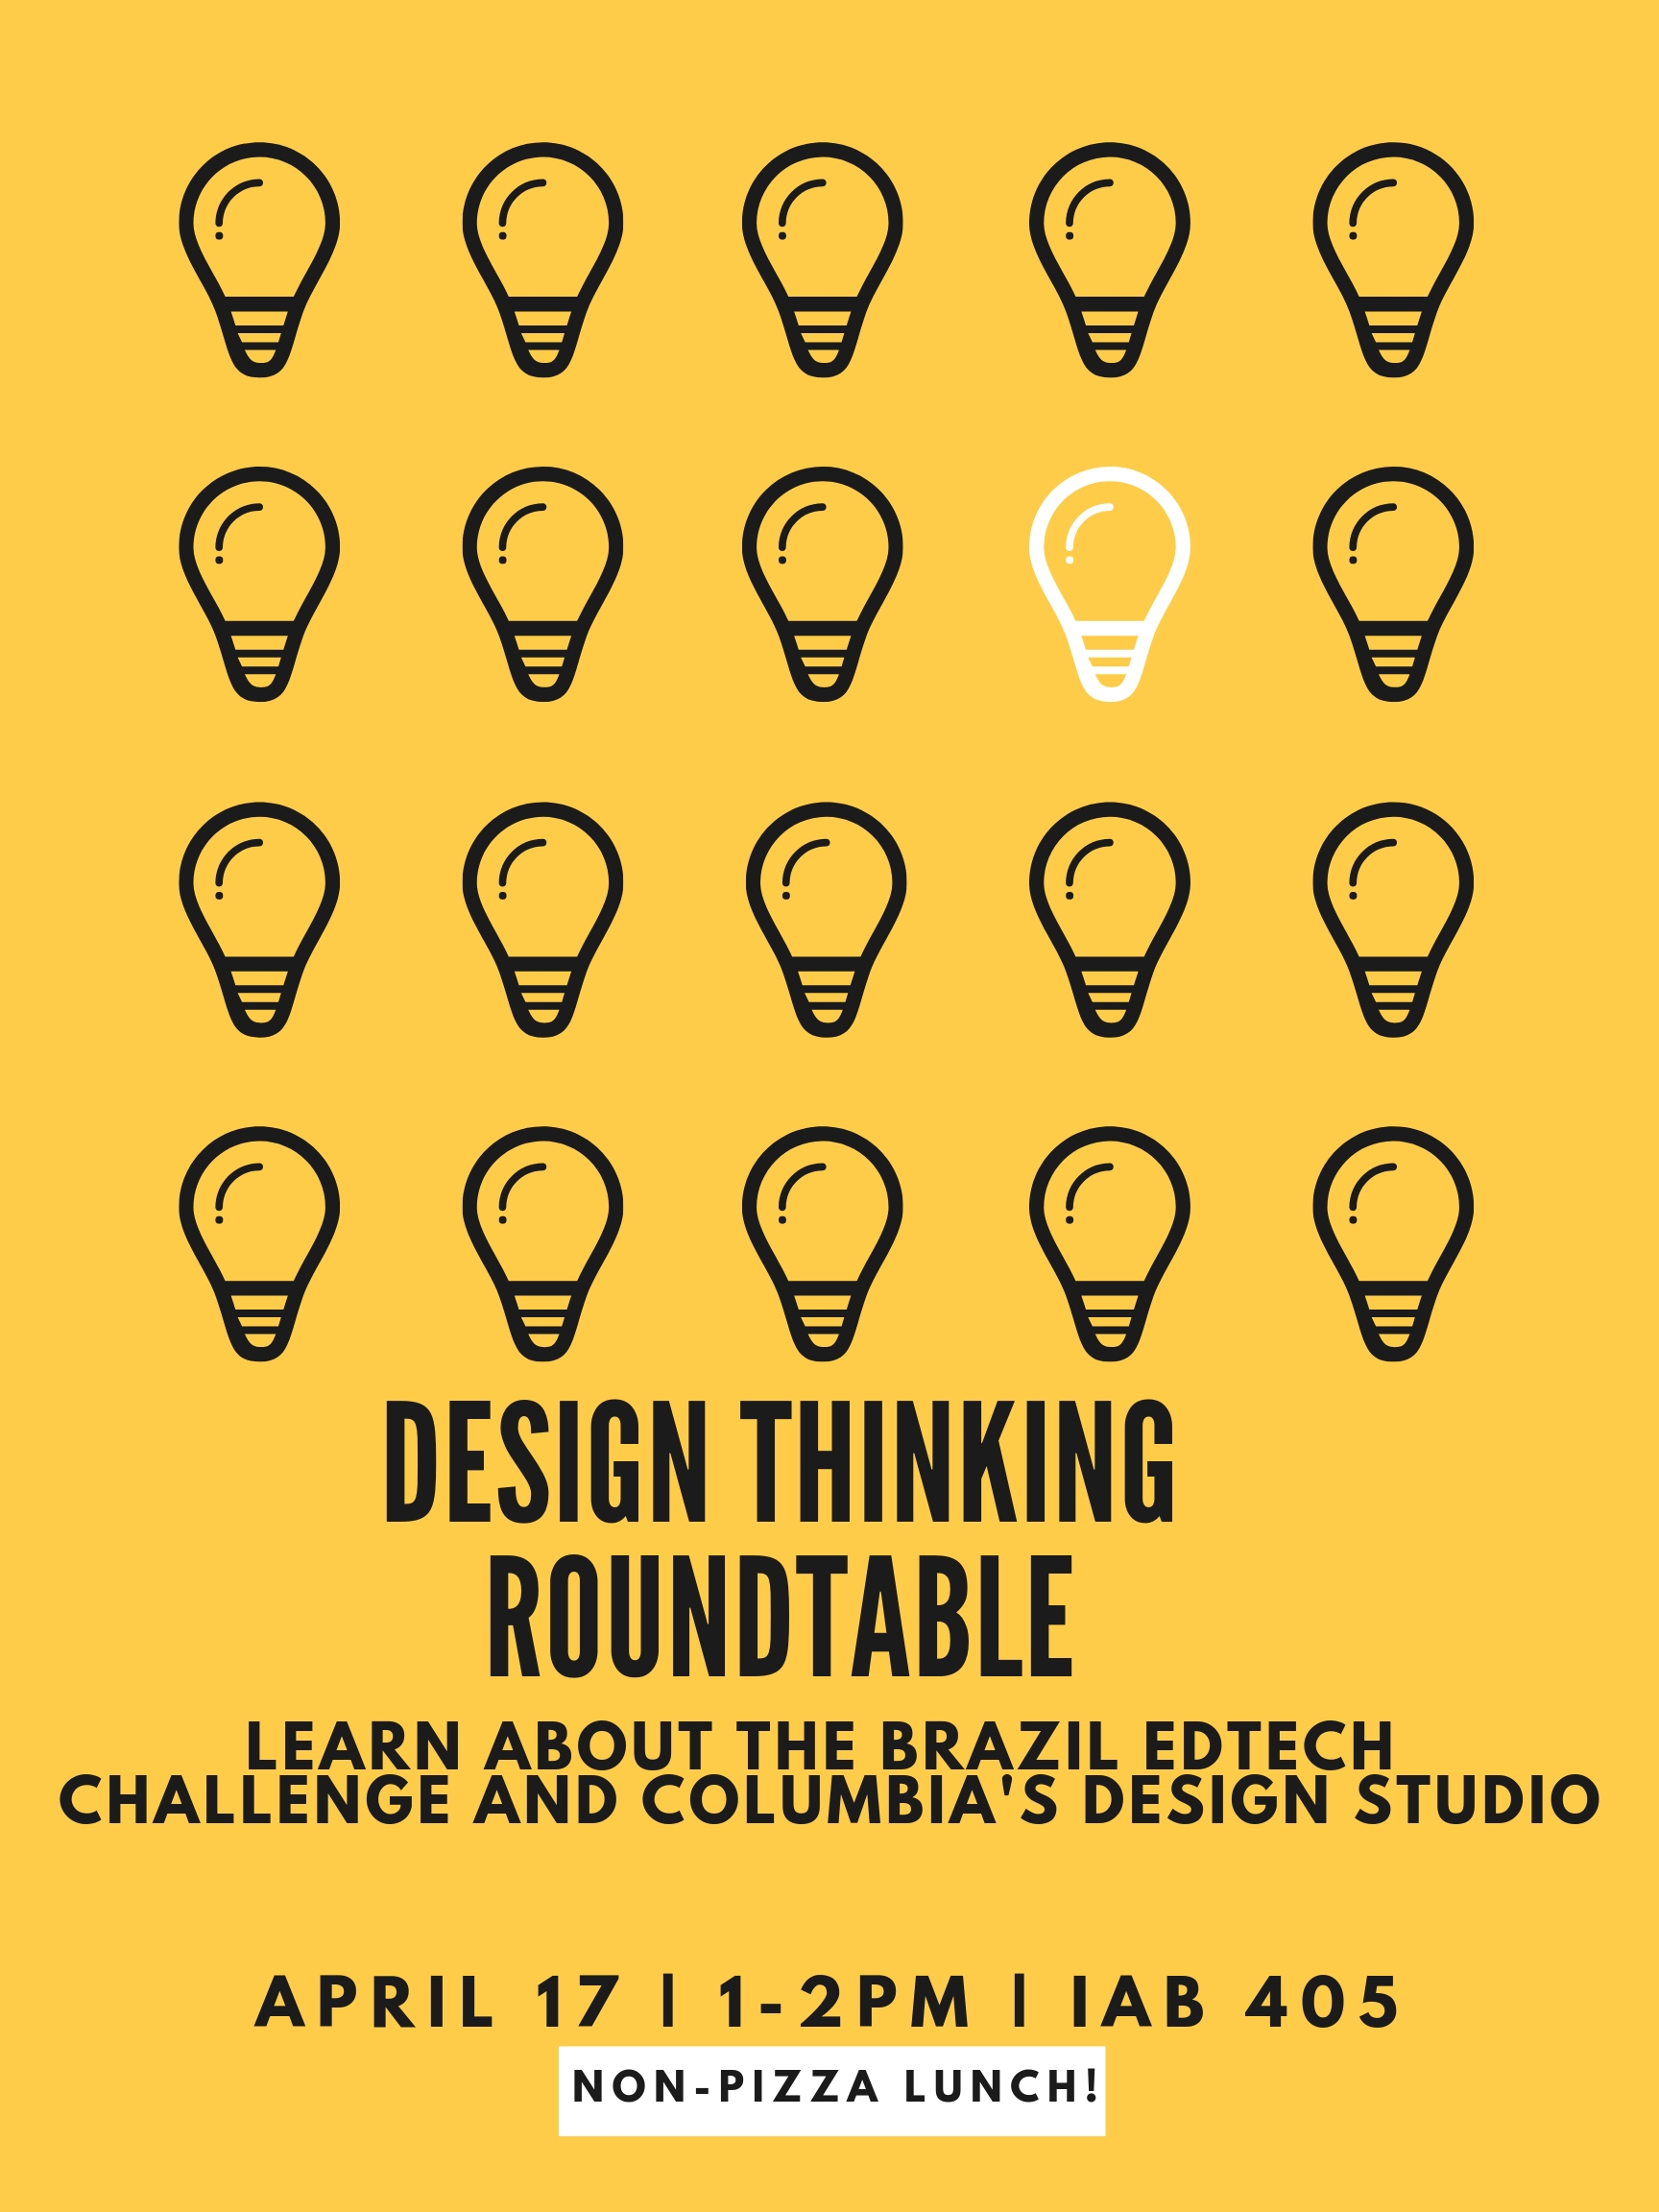 Design Thinking Roundtable - Learn more about the Brazil EdTech Challenge and the Columbia Design Studio!